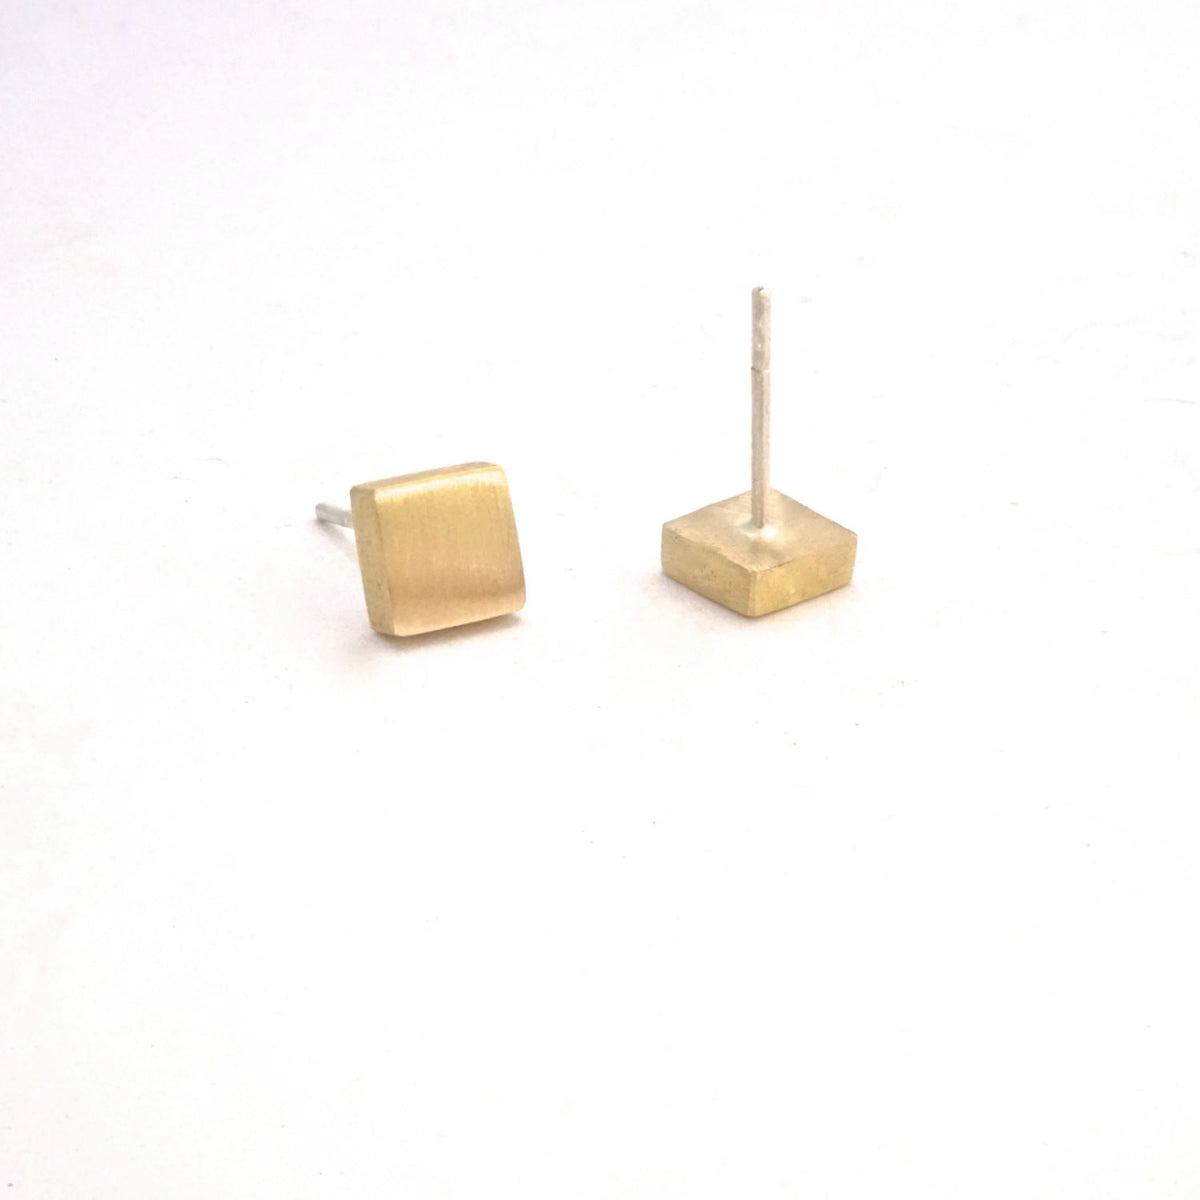 Affordable Hand-Crafted Gold Colored Brass or Sterling Silver Square Stud Earrings - 0170 - Virginia Wynne Designs